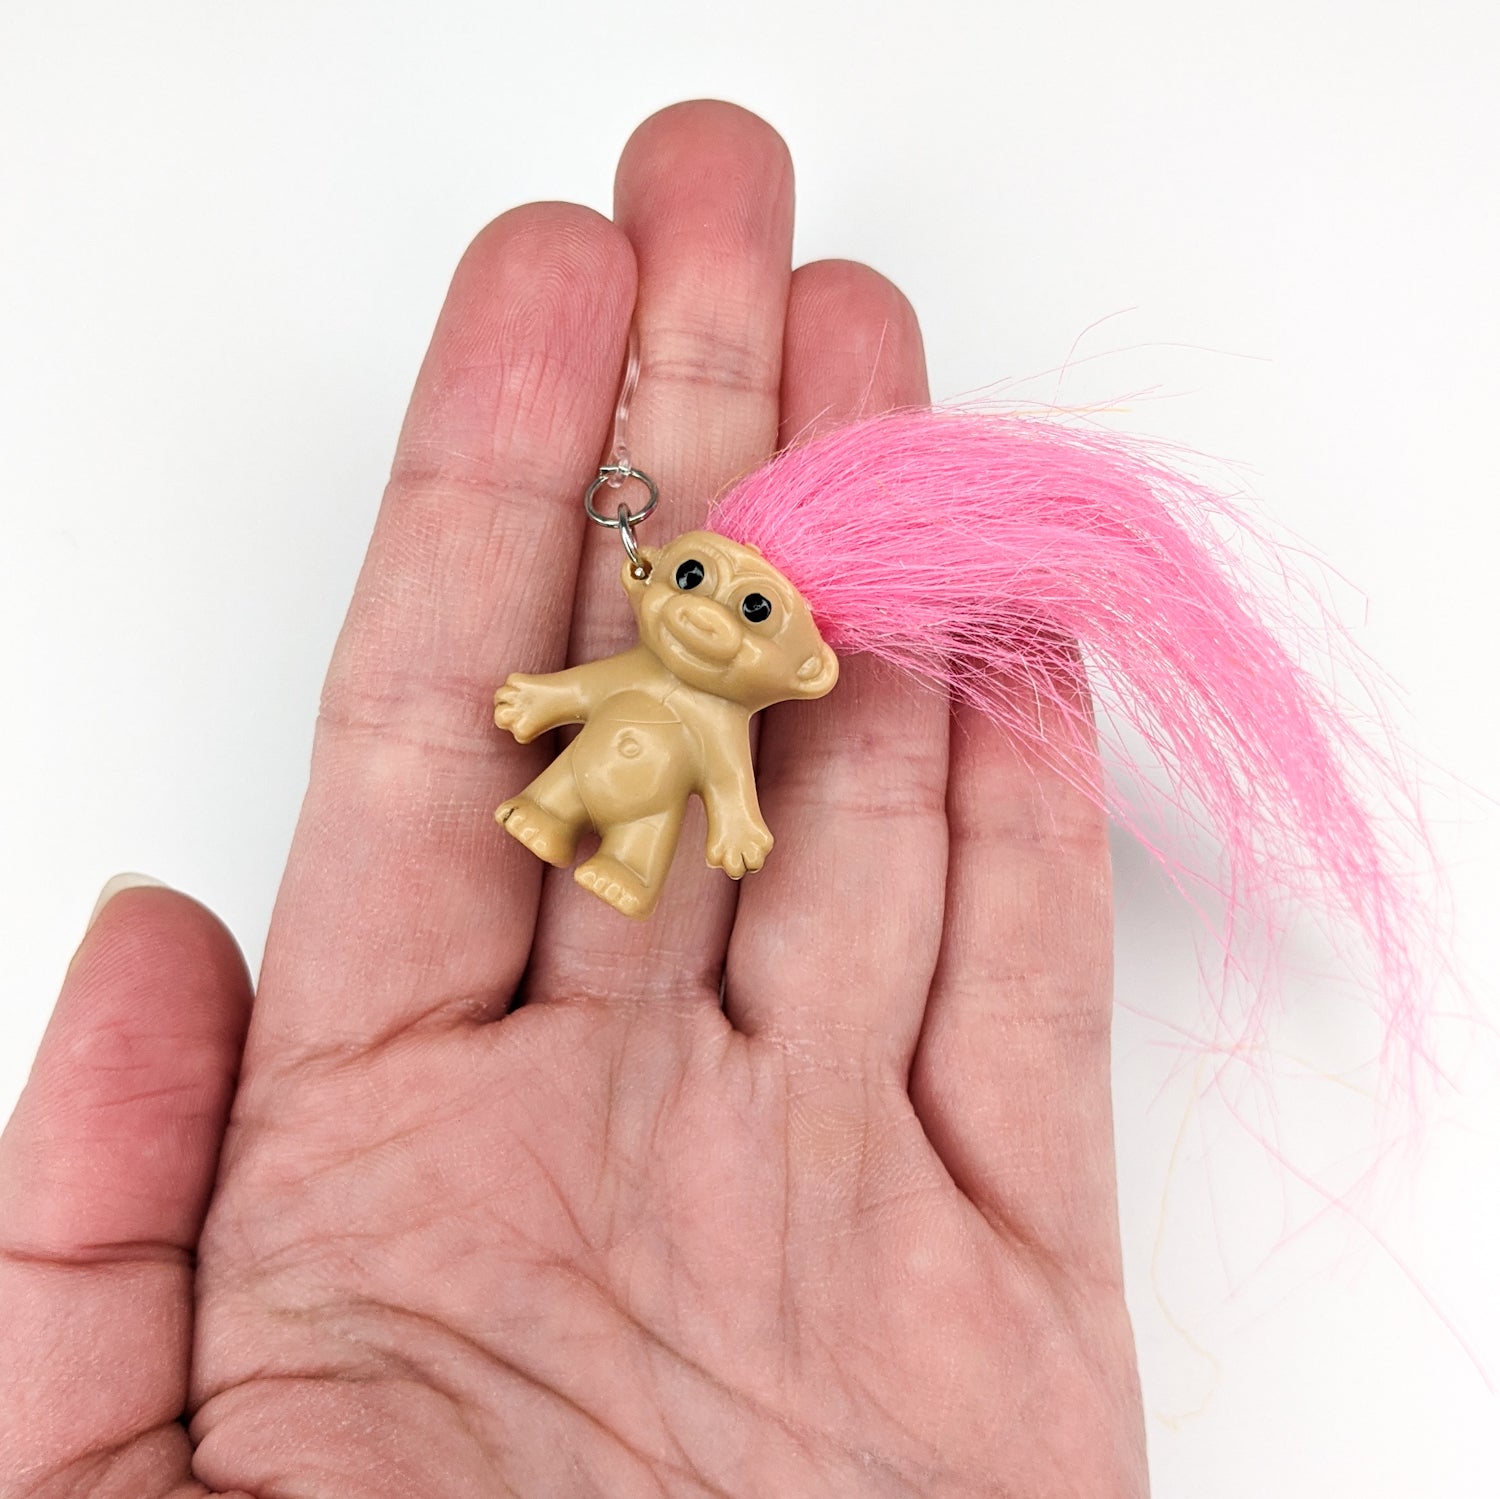 Exaggerated Troll Earrings (Dangles) - size comparison hand